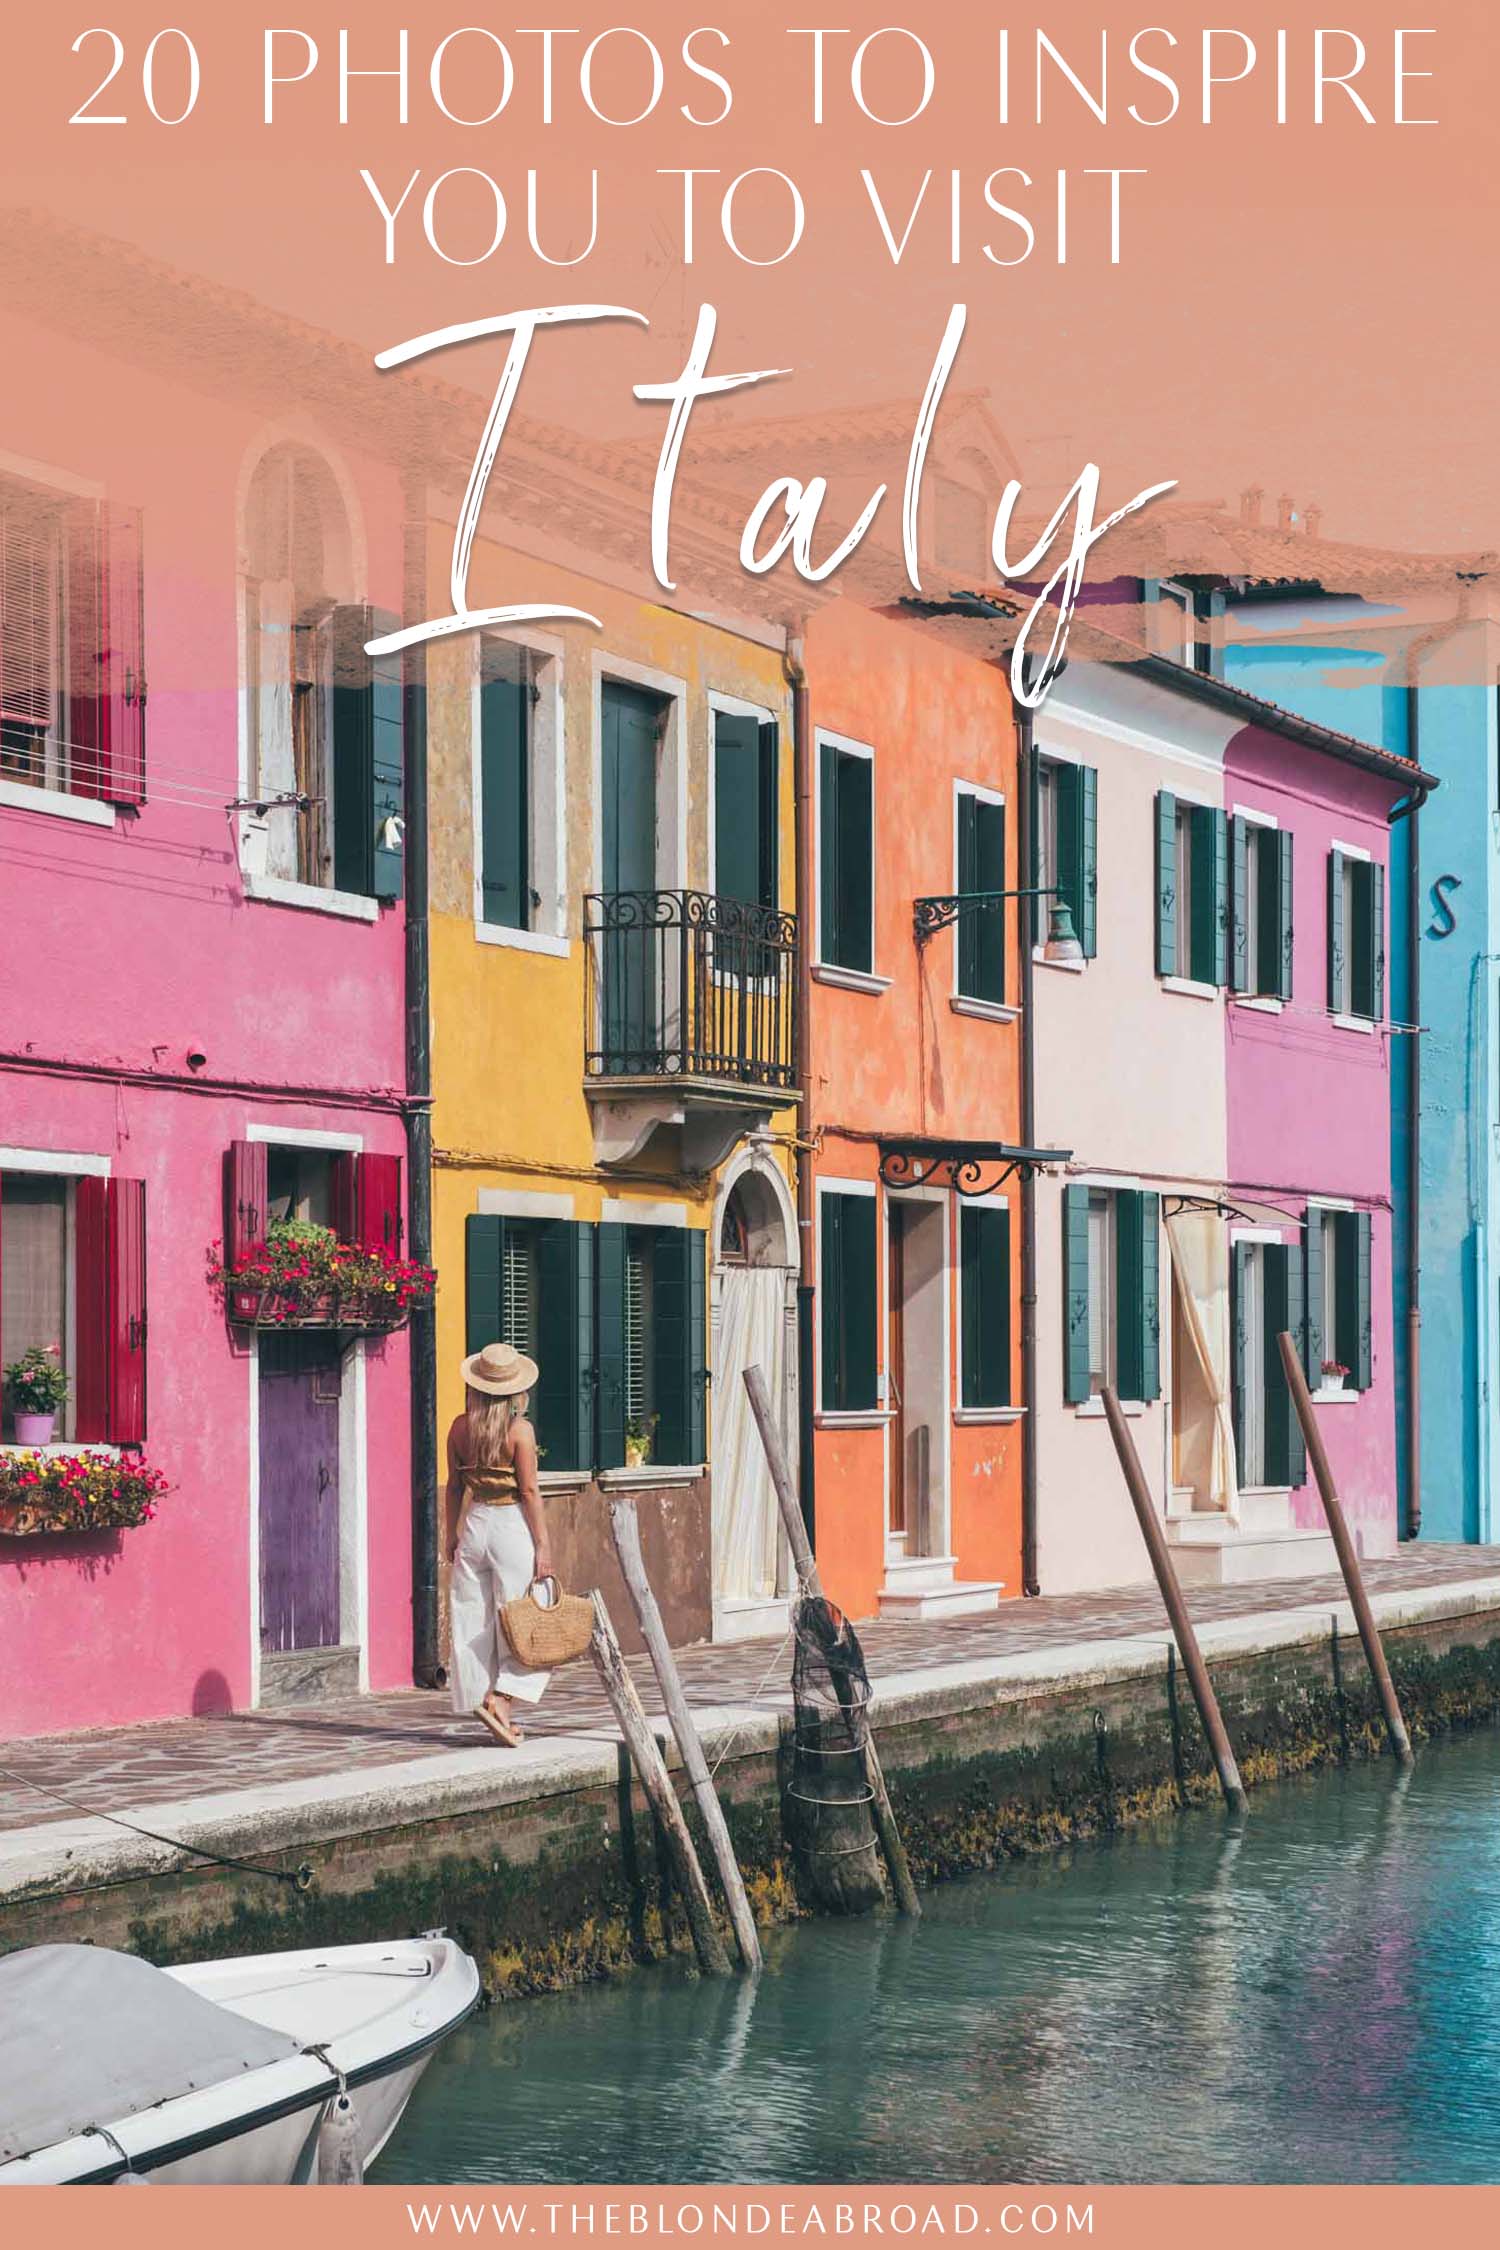 20 Photos to Inspire You to Visit Italy Burano